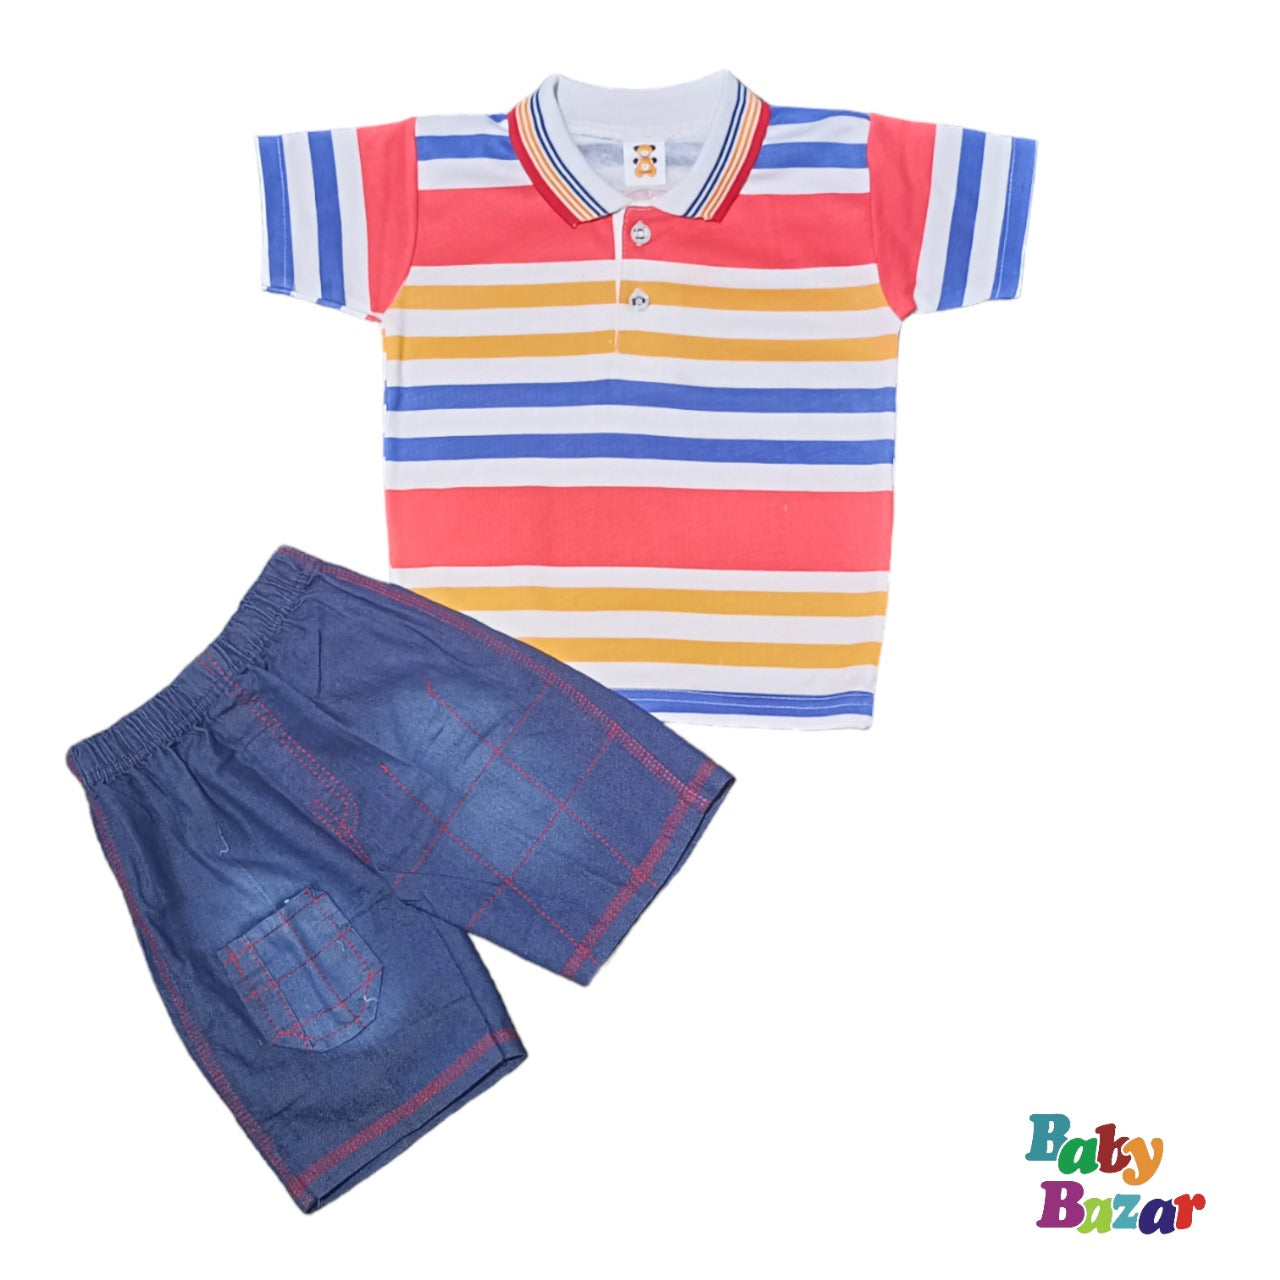 Beautiful And Attractive Nicker Shirt For Baby Boy - Multi